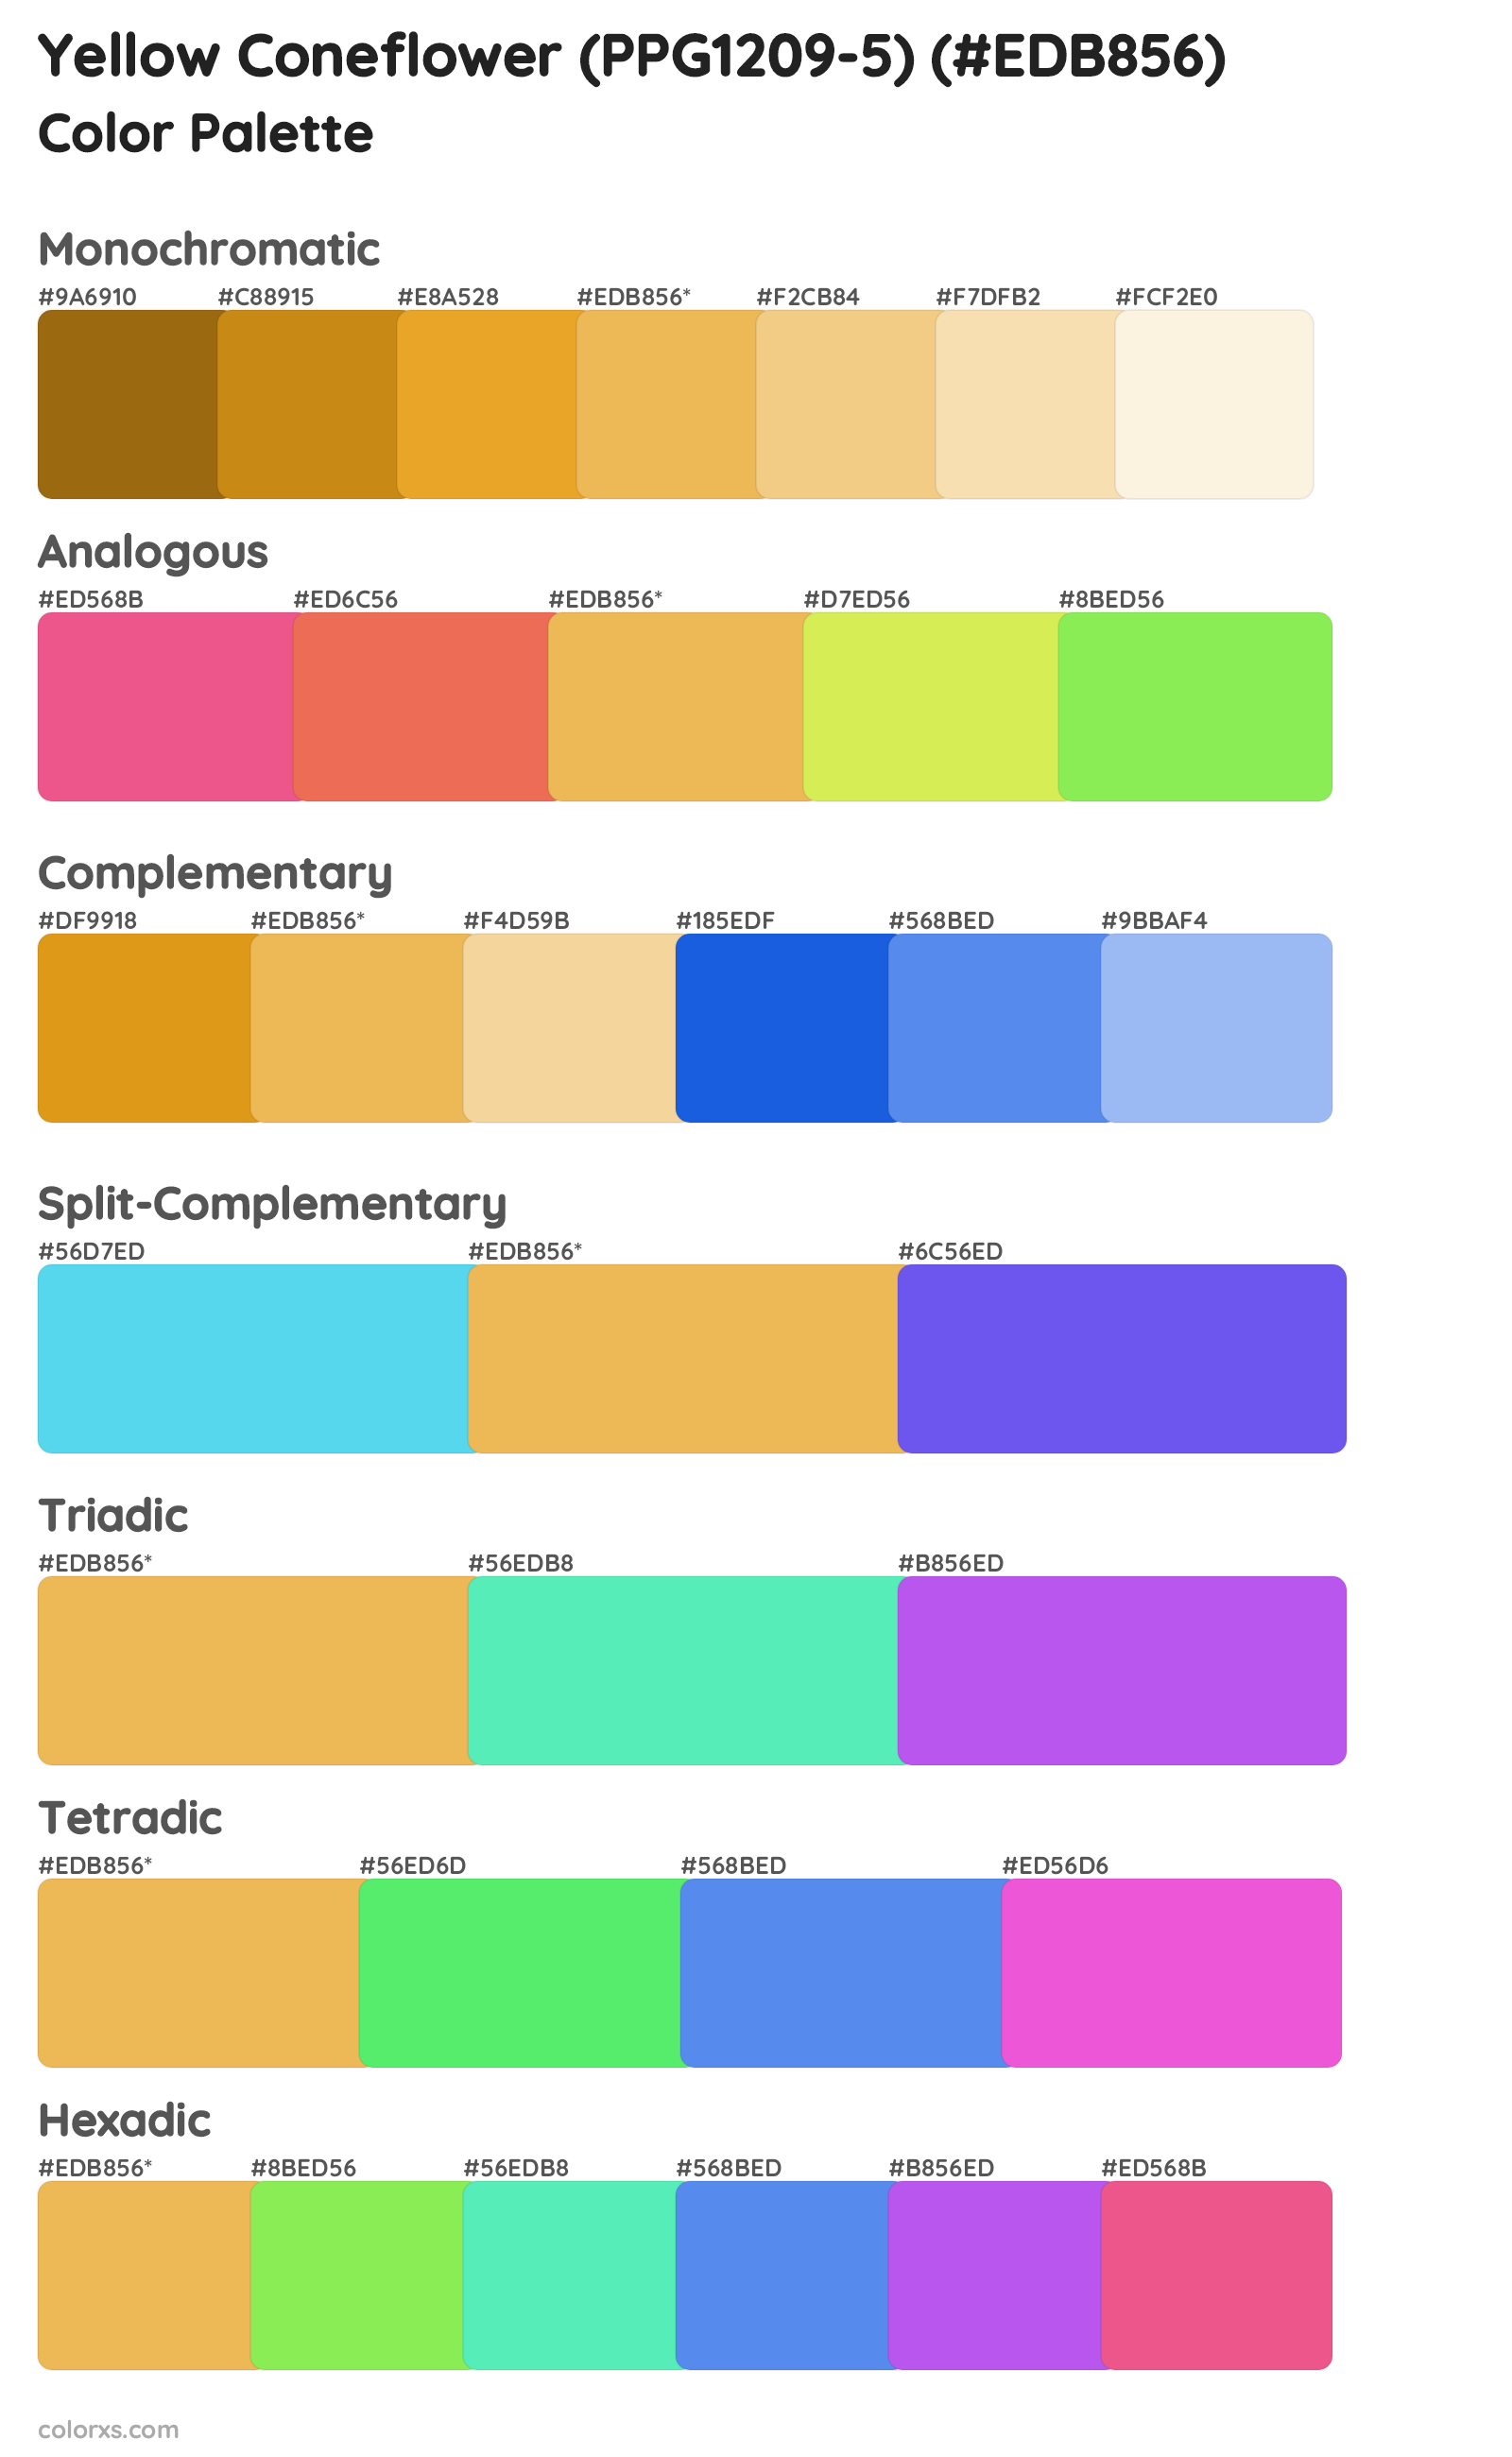 Yellow Coneflower (PPG1209-5) Color Scheme Palettes